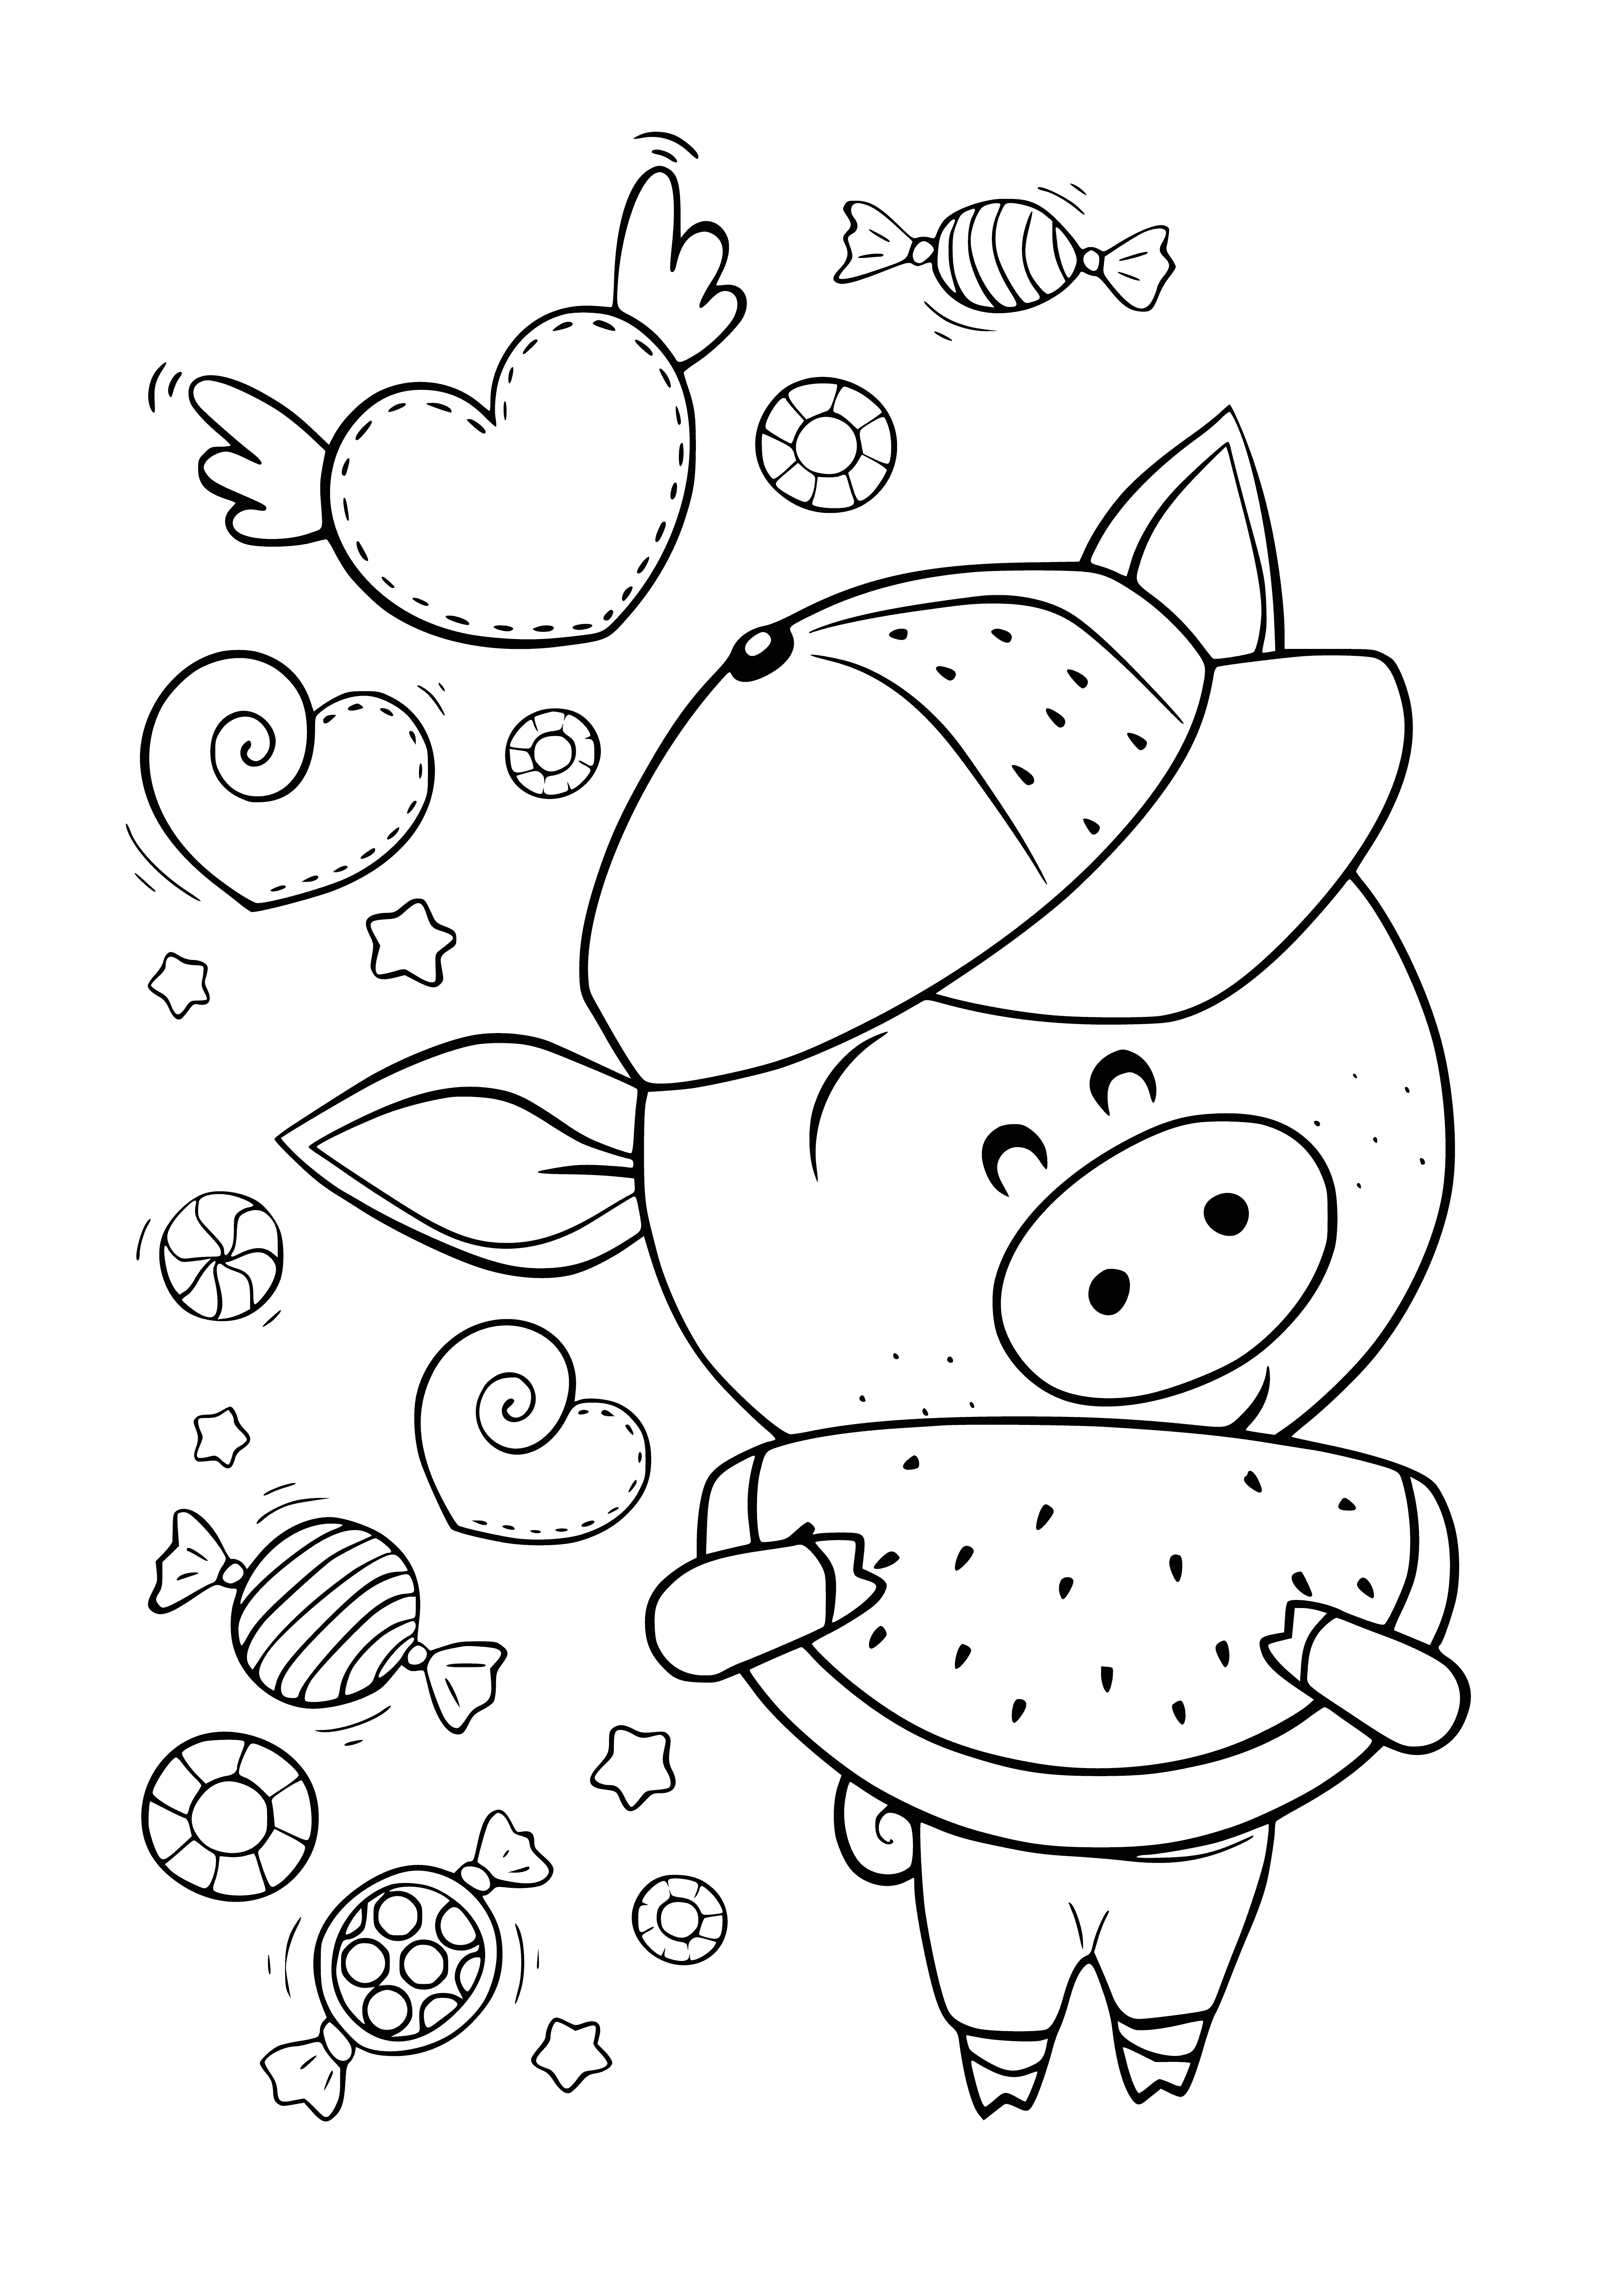 coloring page: Cheerful pig surrounded by flowers and hearts is the perfect kawaii coloring page! #coloring #kawaii